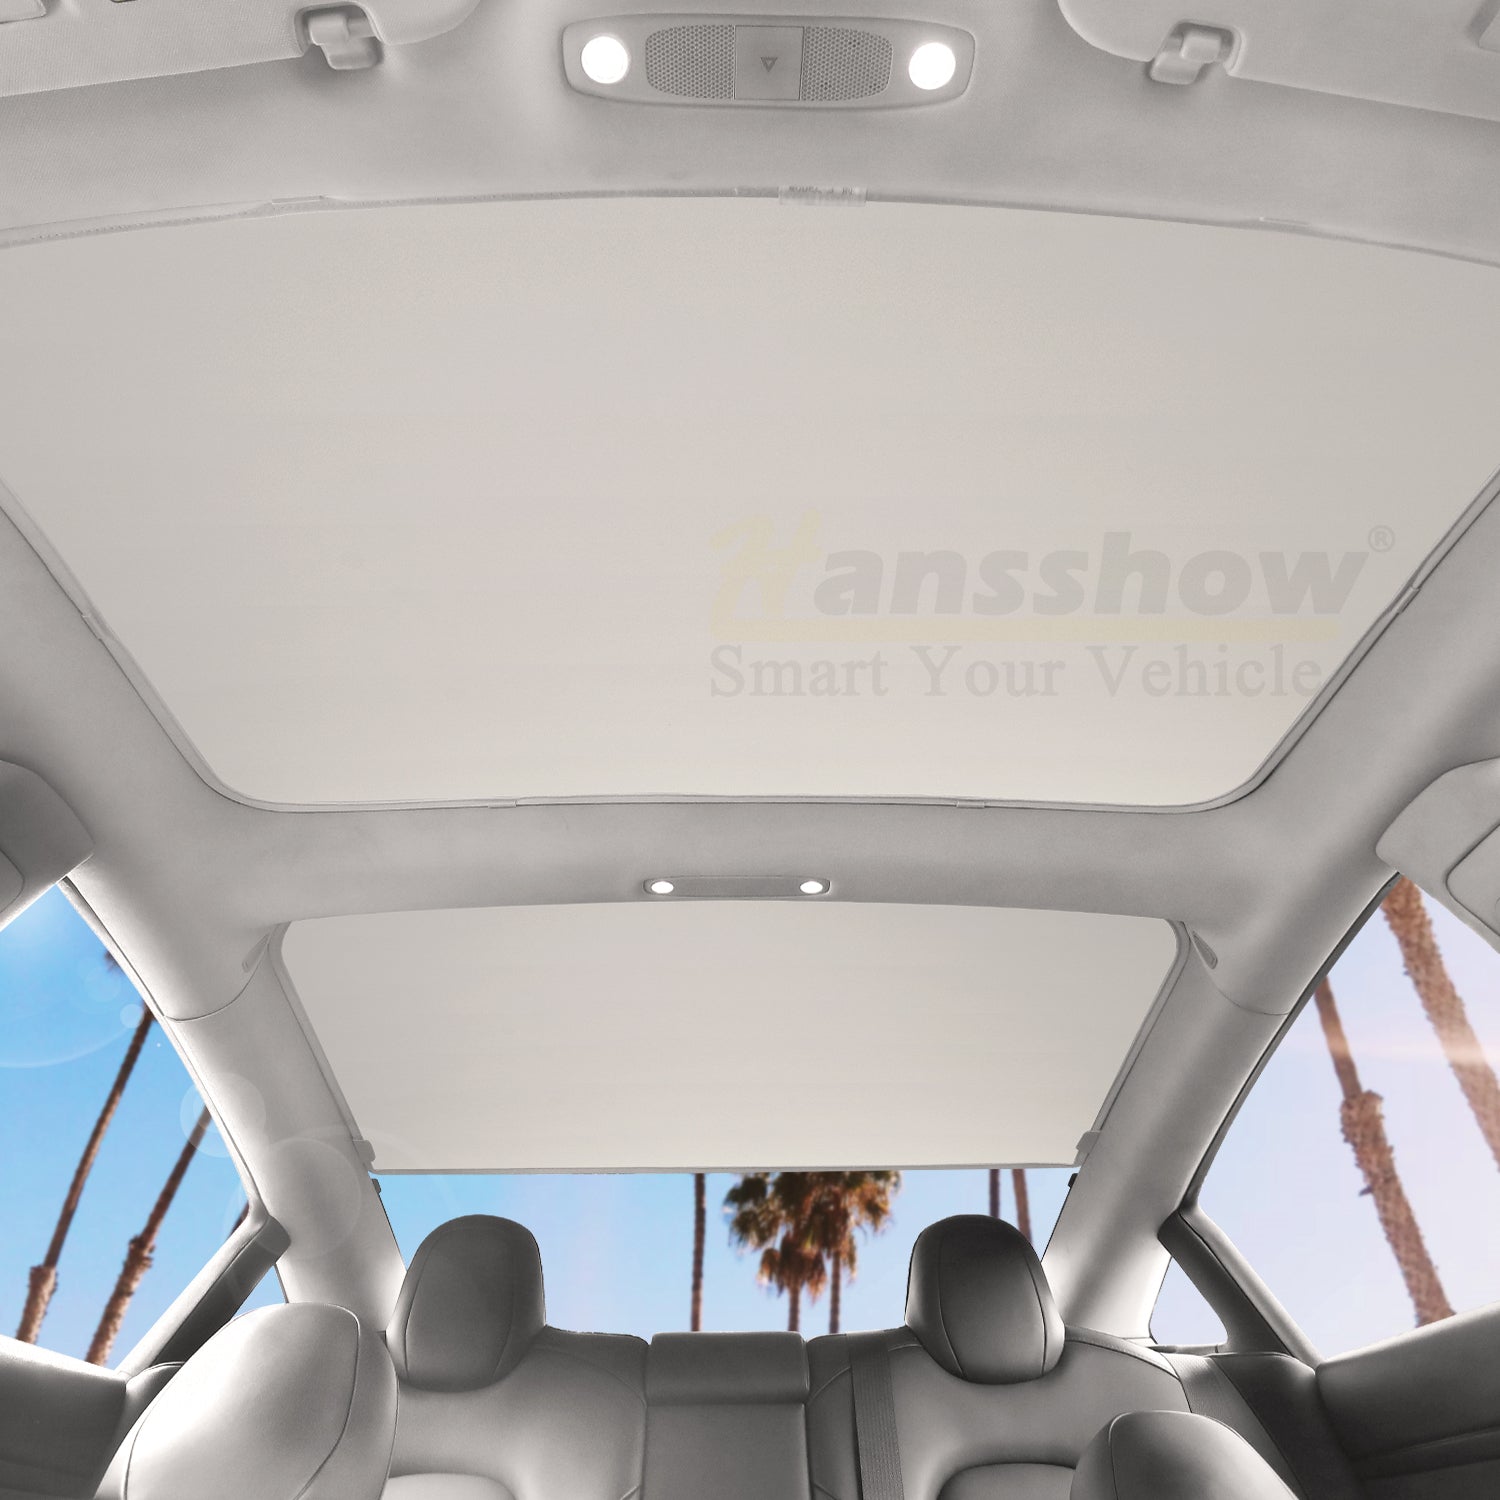 Model Y Glass Roof Roller Sunshade (Fabric Style) Hansshow